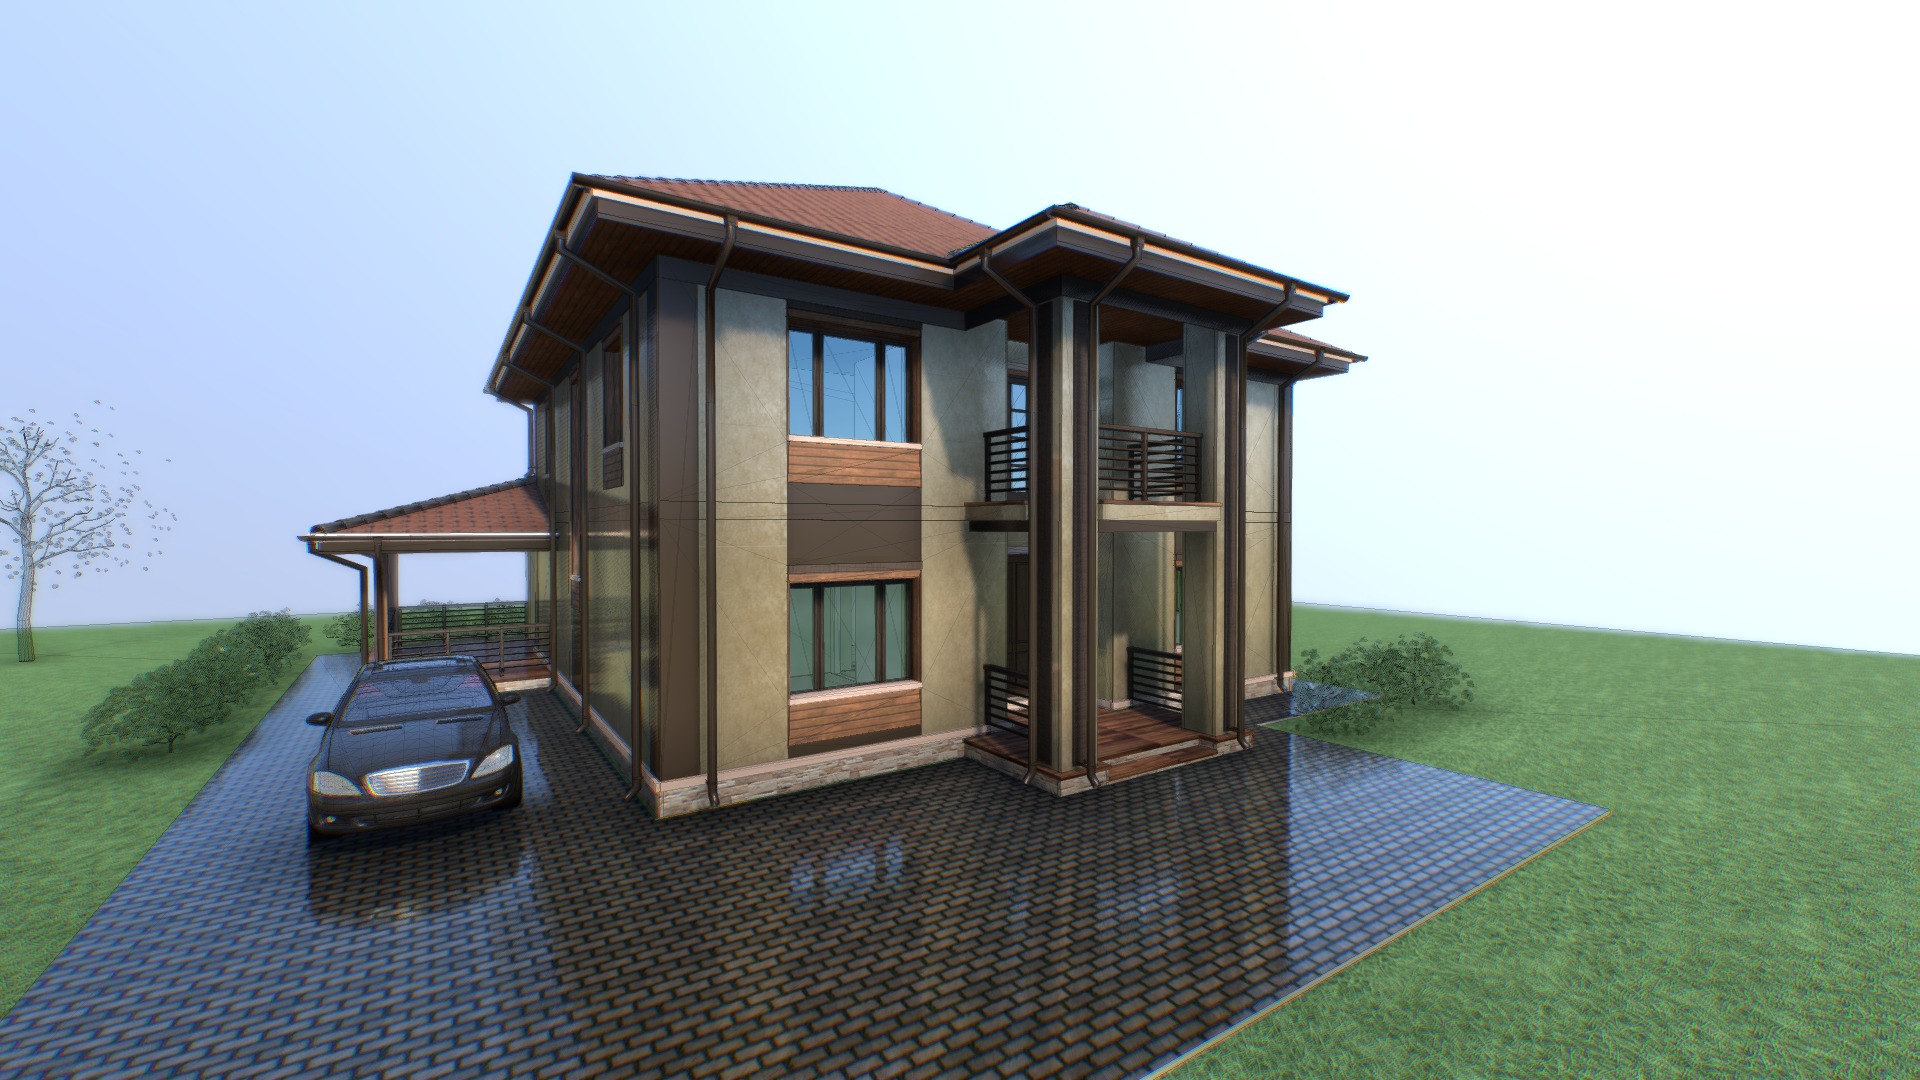 3D model Обводный - This is a 3D model of the Обводный. The 3D model is about a house with a pool.